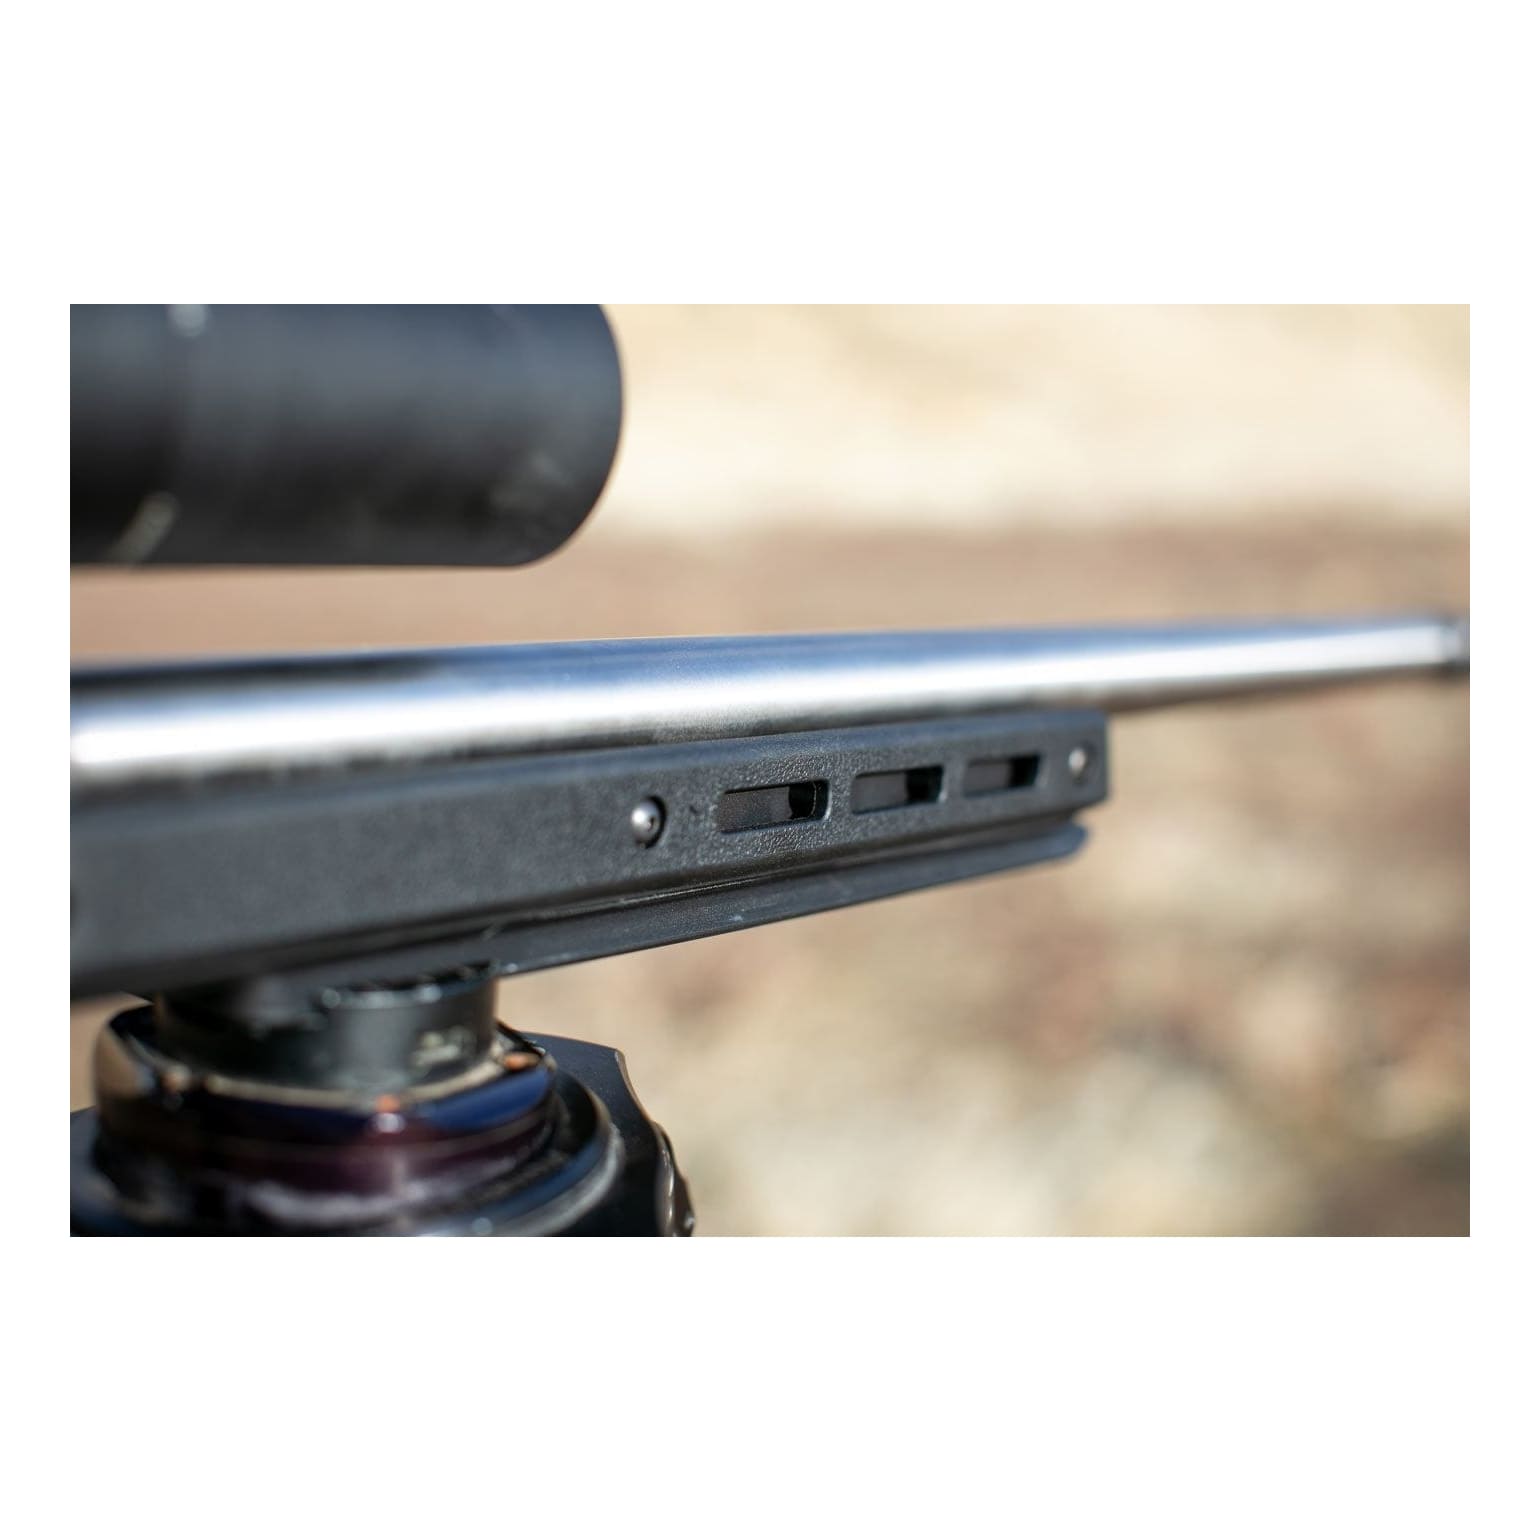 MDT® XRS Tikka® T3/T3X Short-Action Chassis System